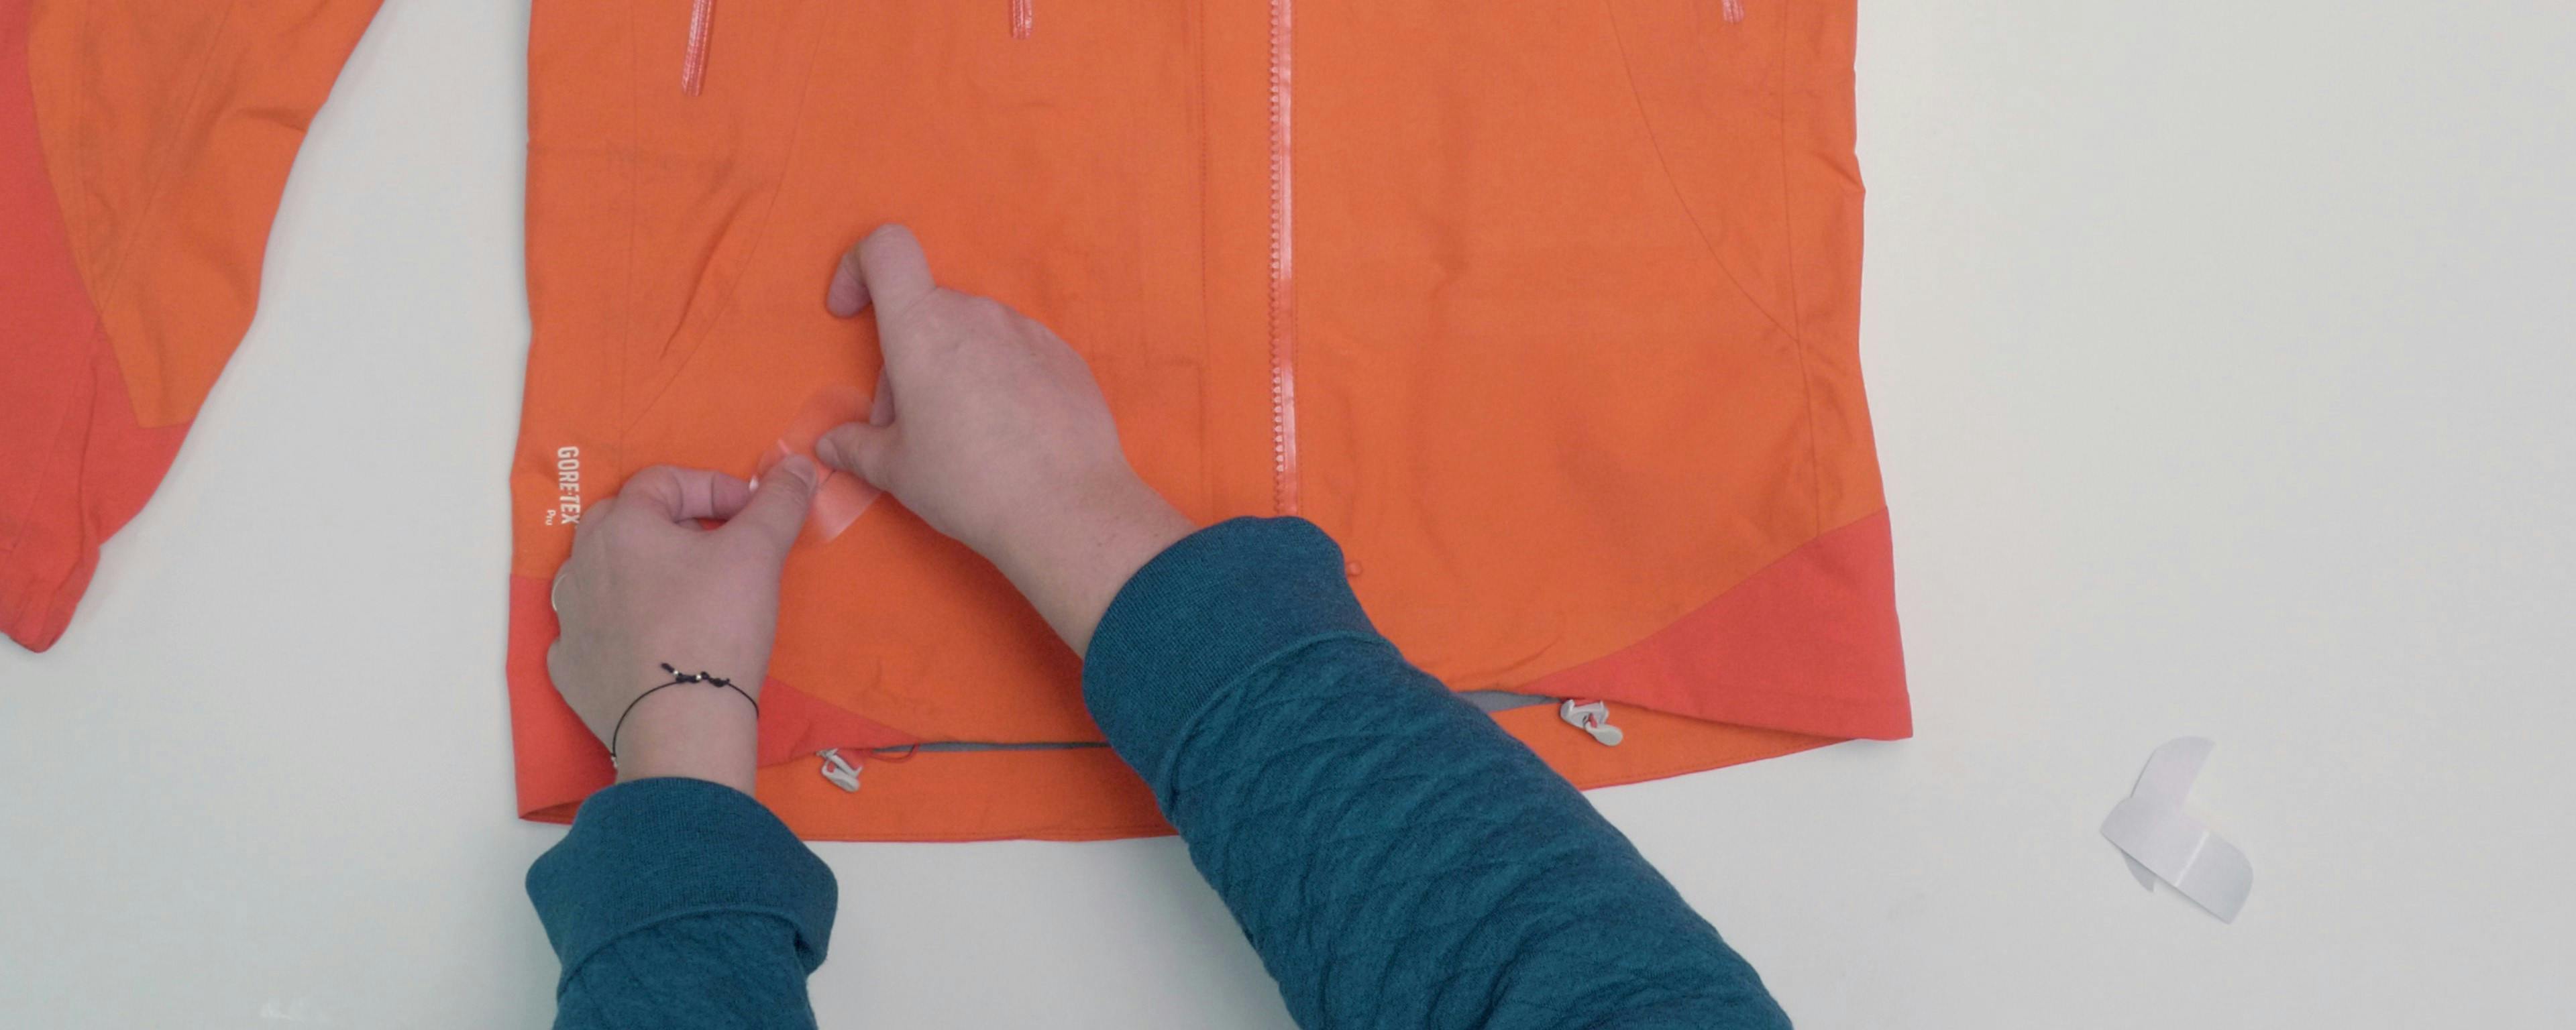 How to Repair a Ripped Rain Jacket